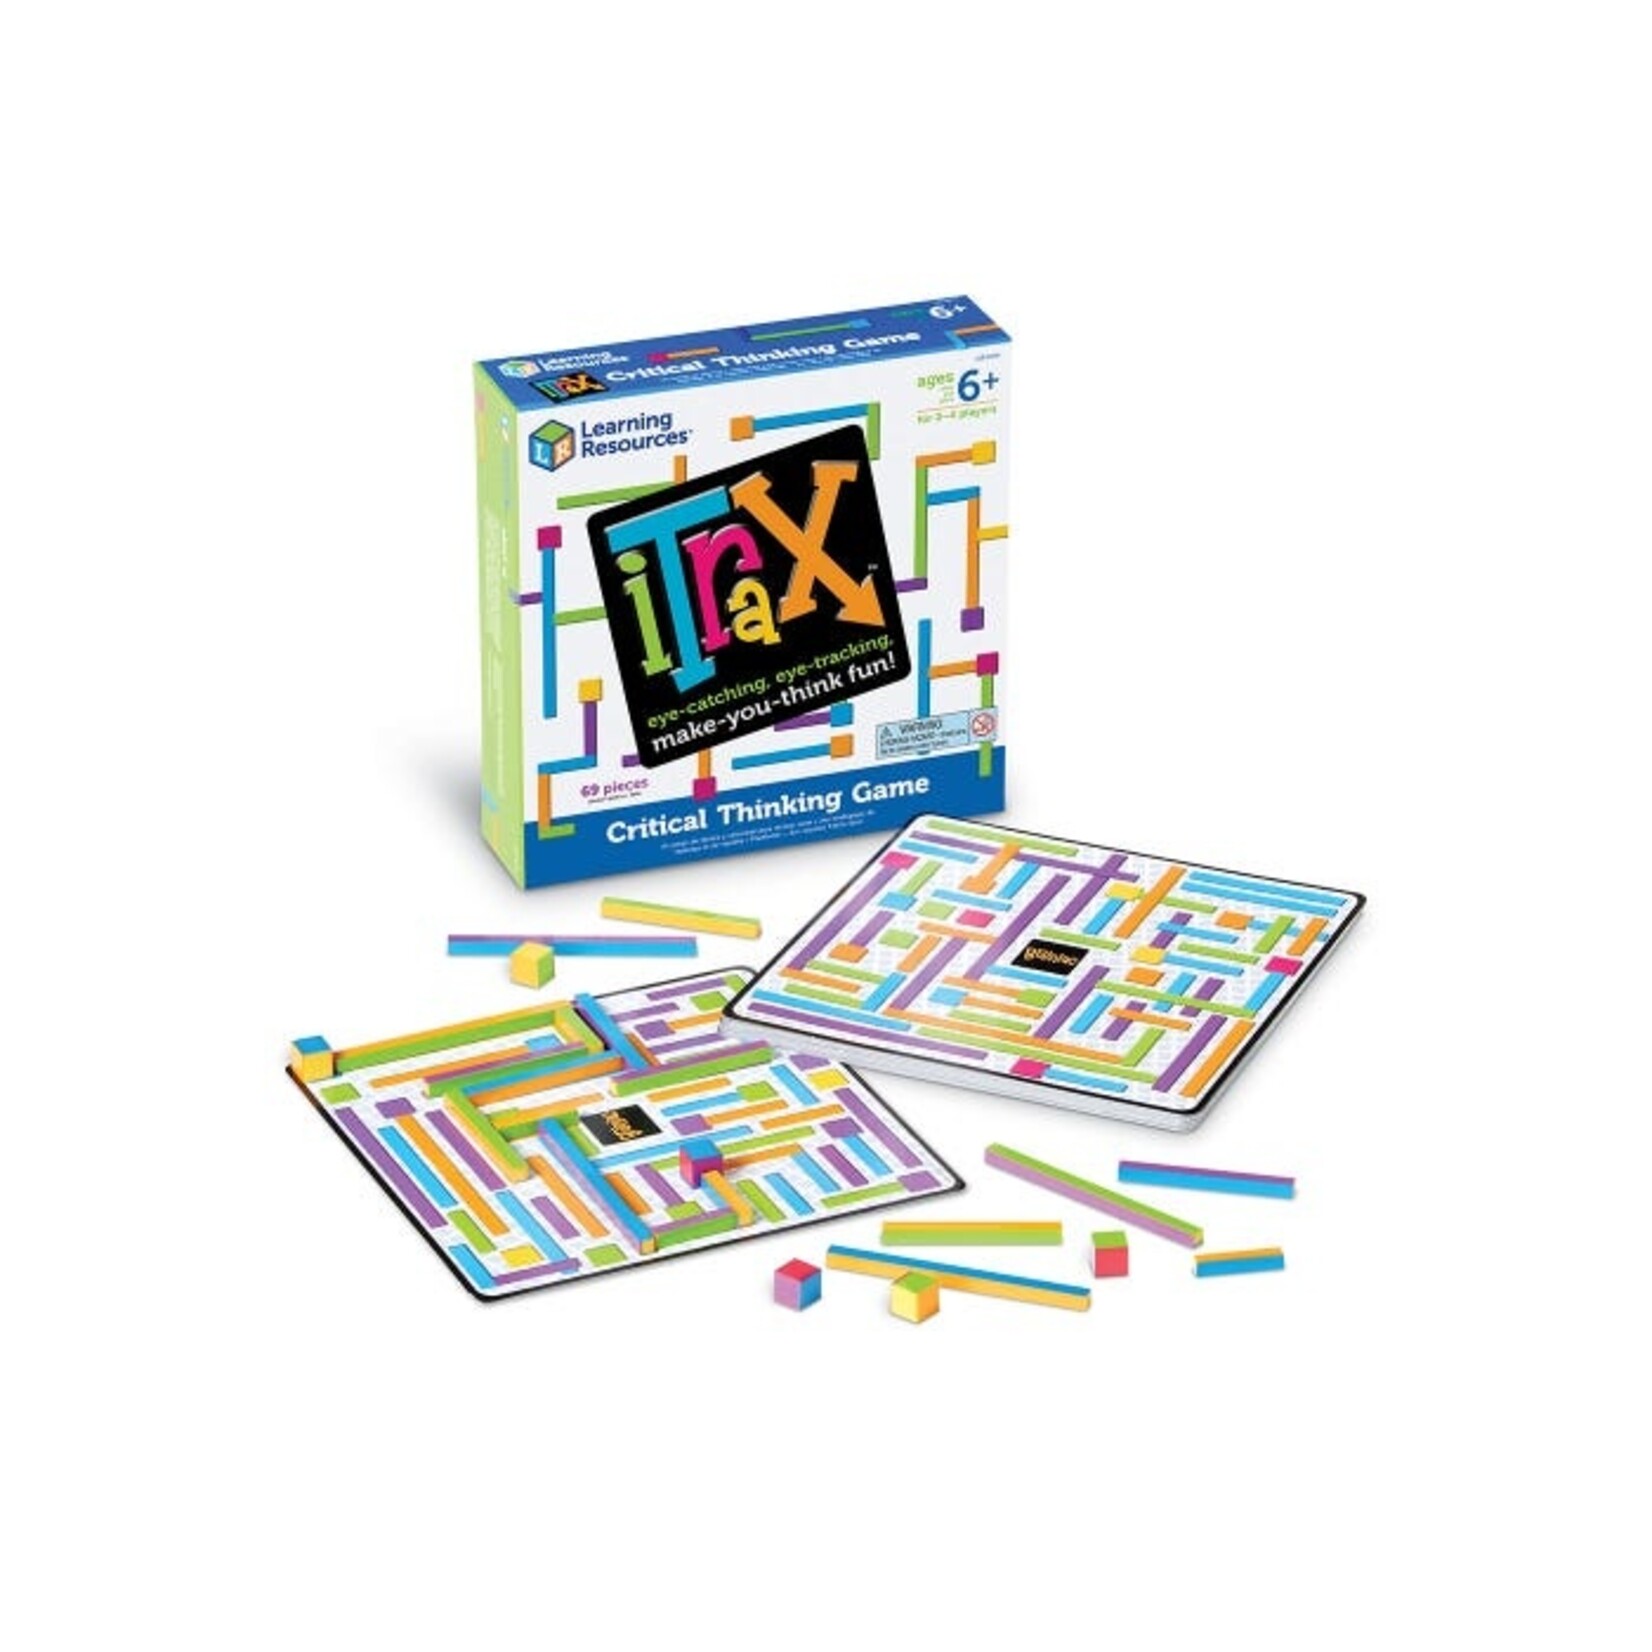 LEARNING RESOURCES INC iTrax™ Critical Thinking Game